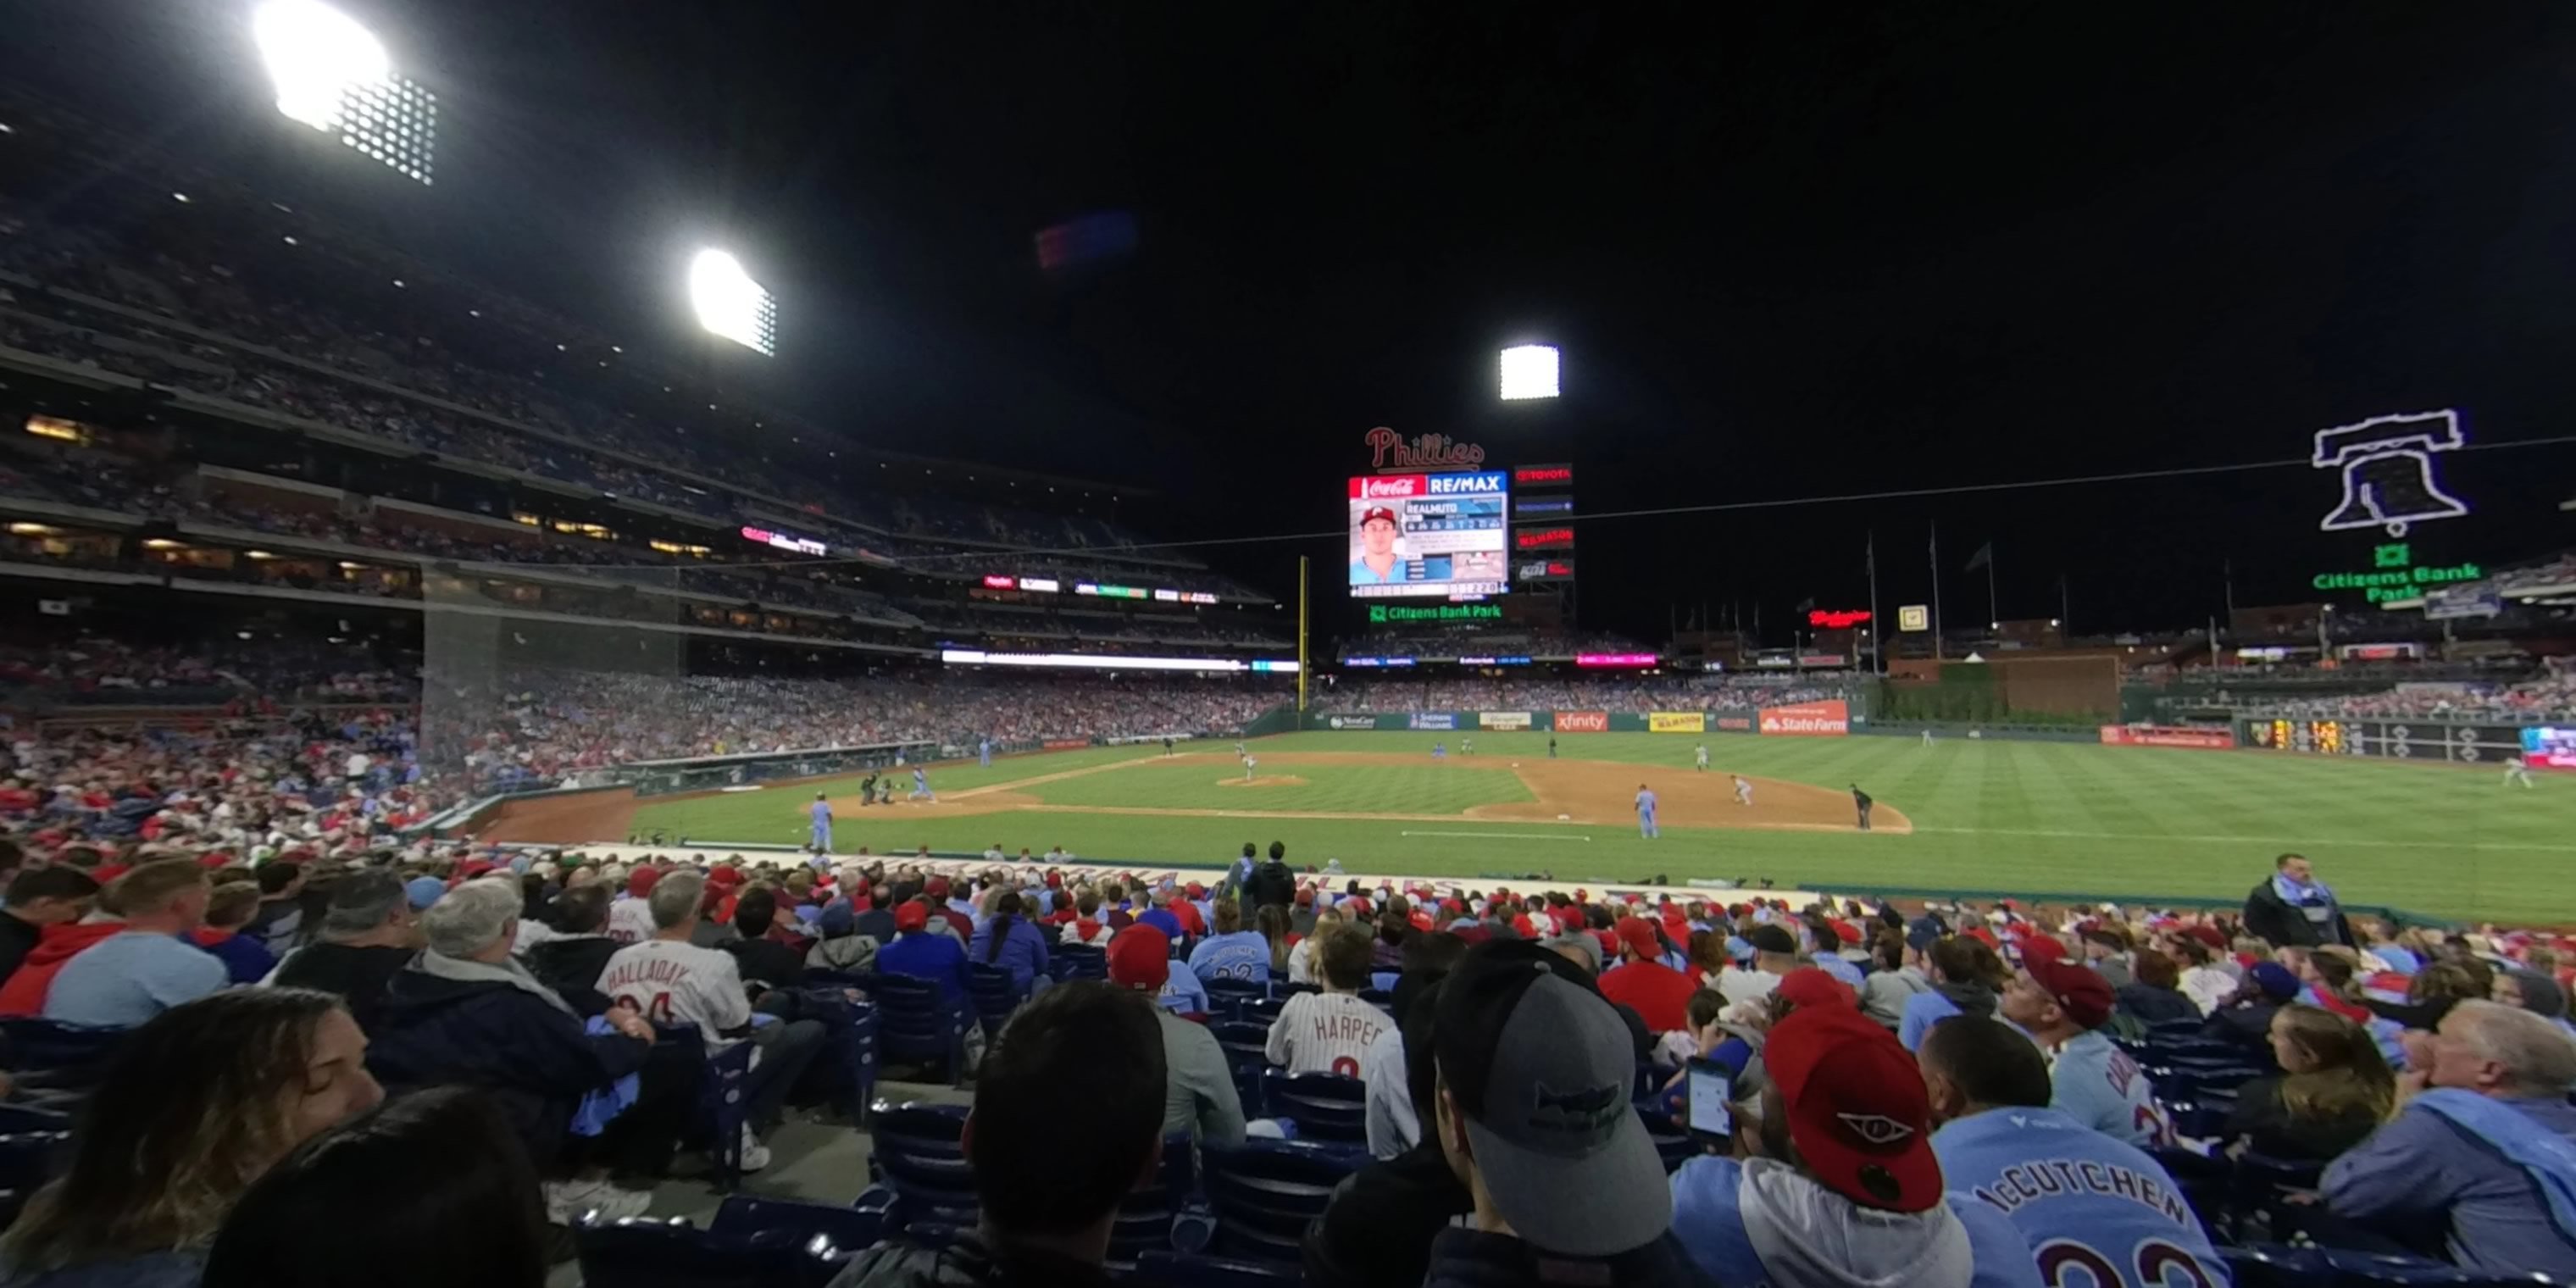 section 116 panoramic seat view  for baseball - citizens bank park